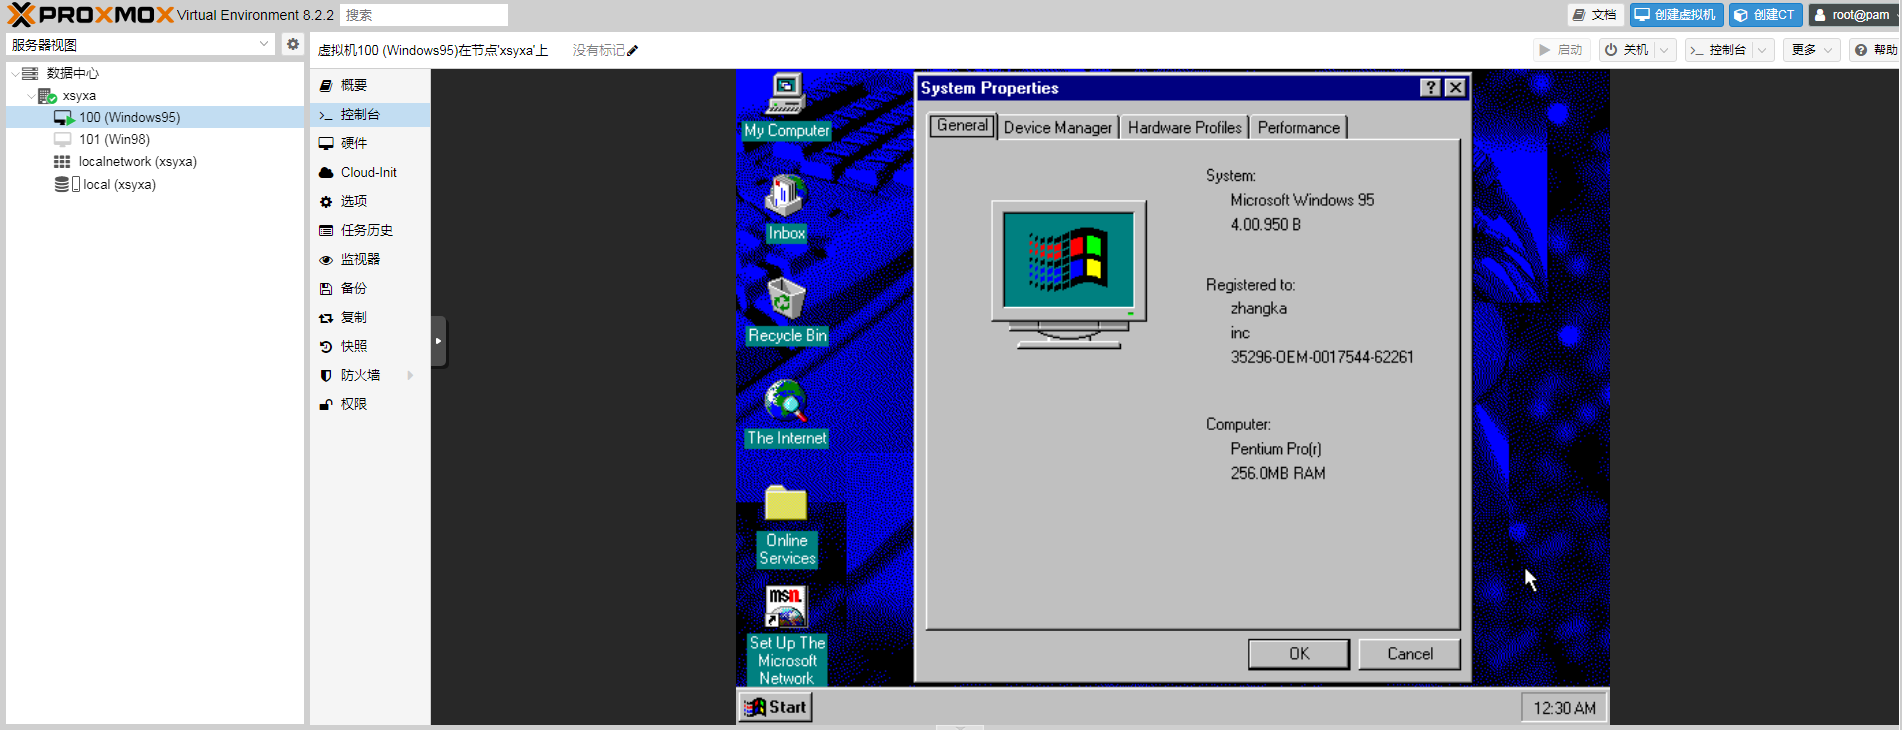 PVE安装Windows 95报错 while initializing device IOS